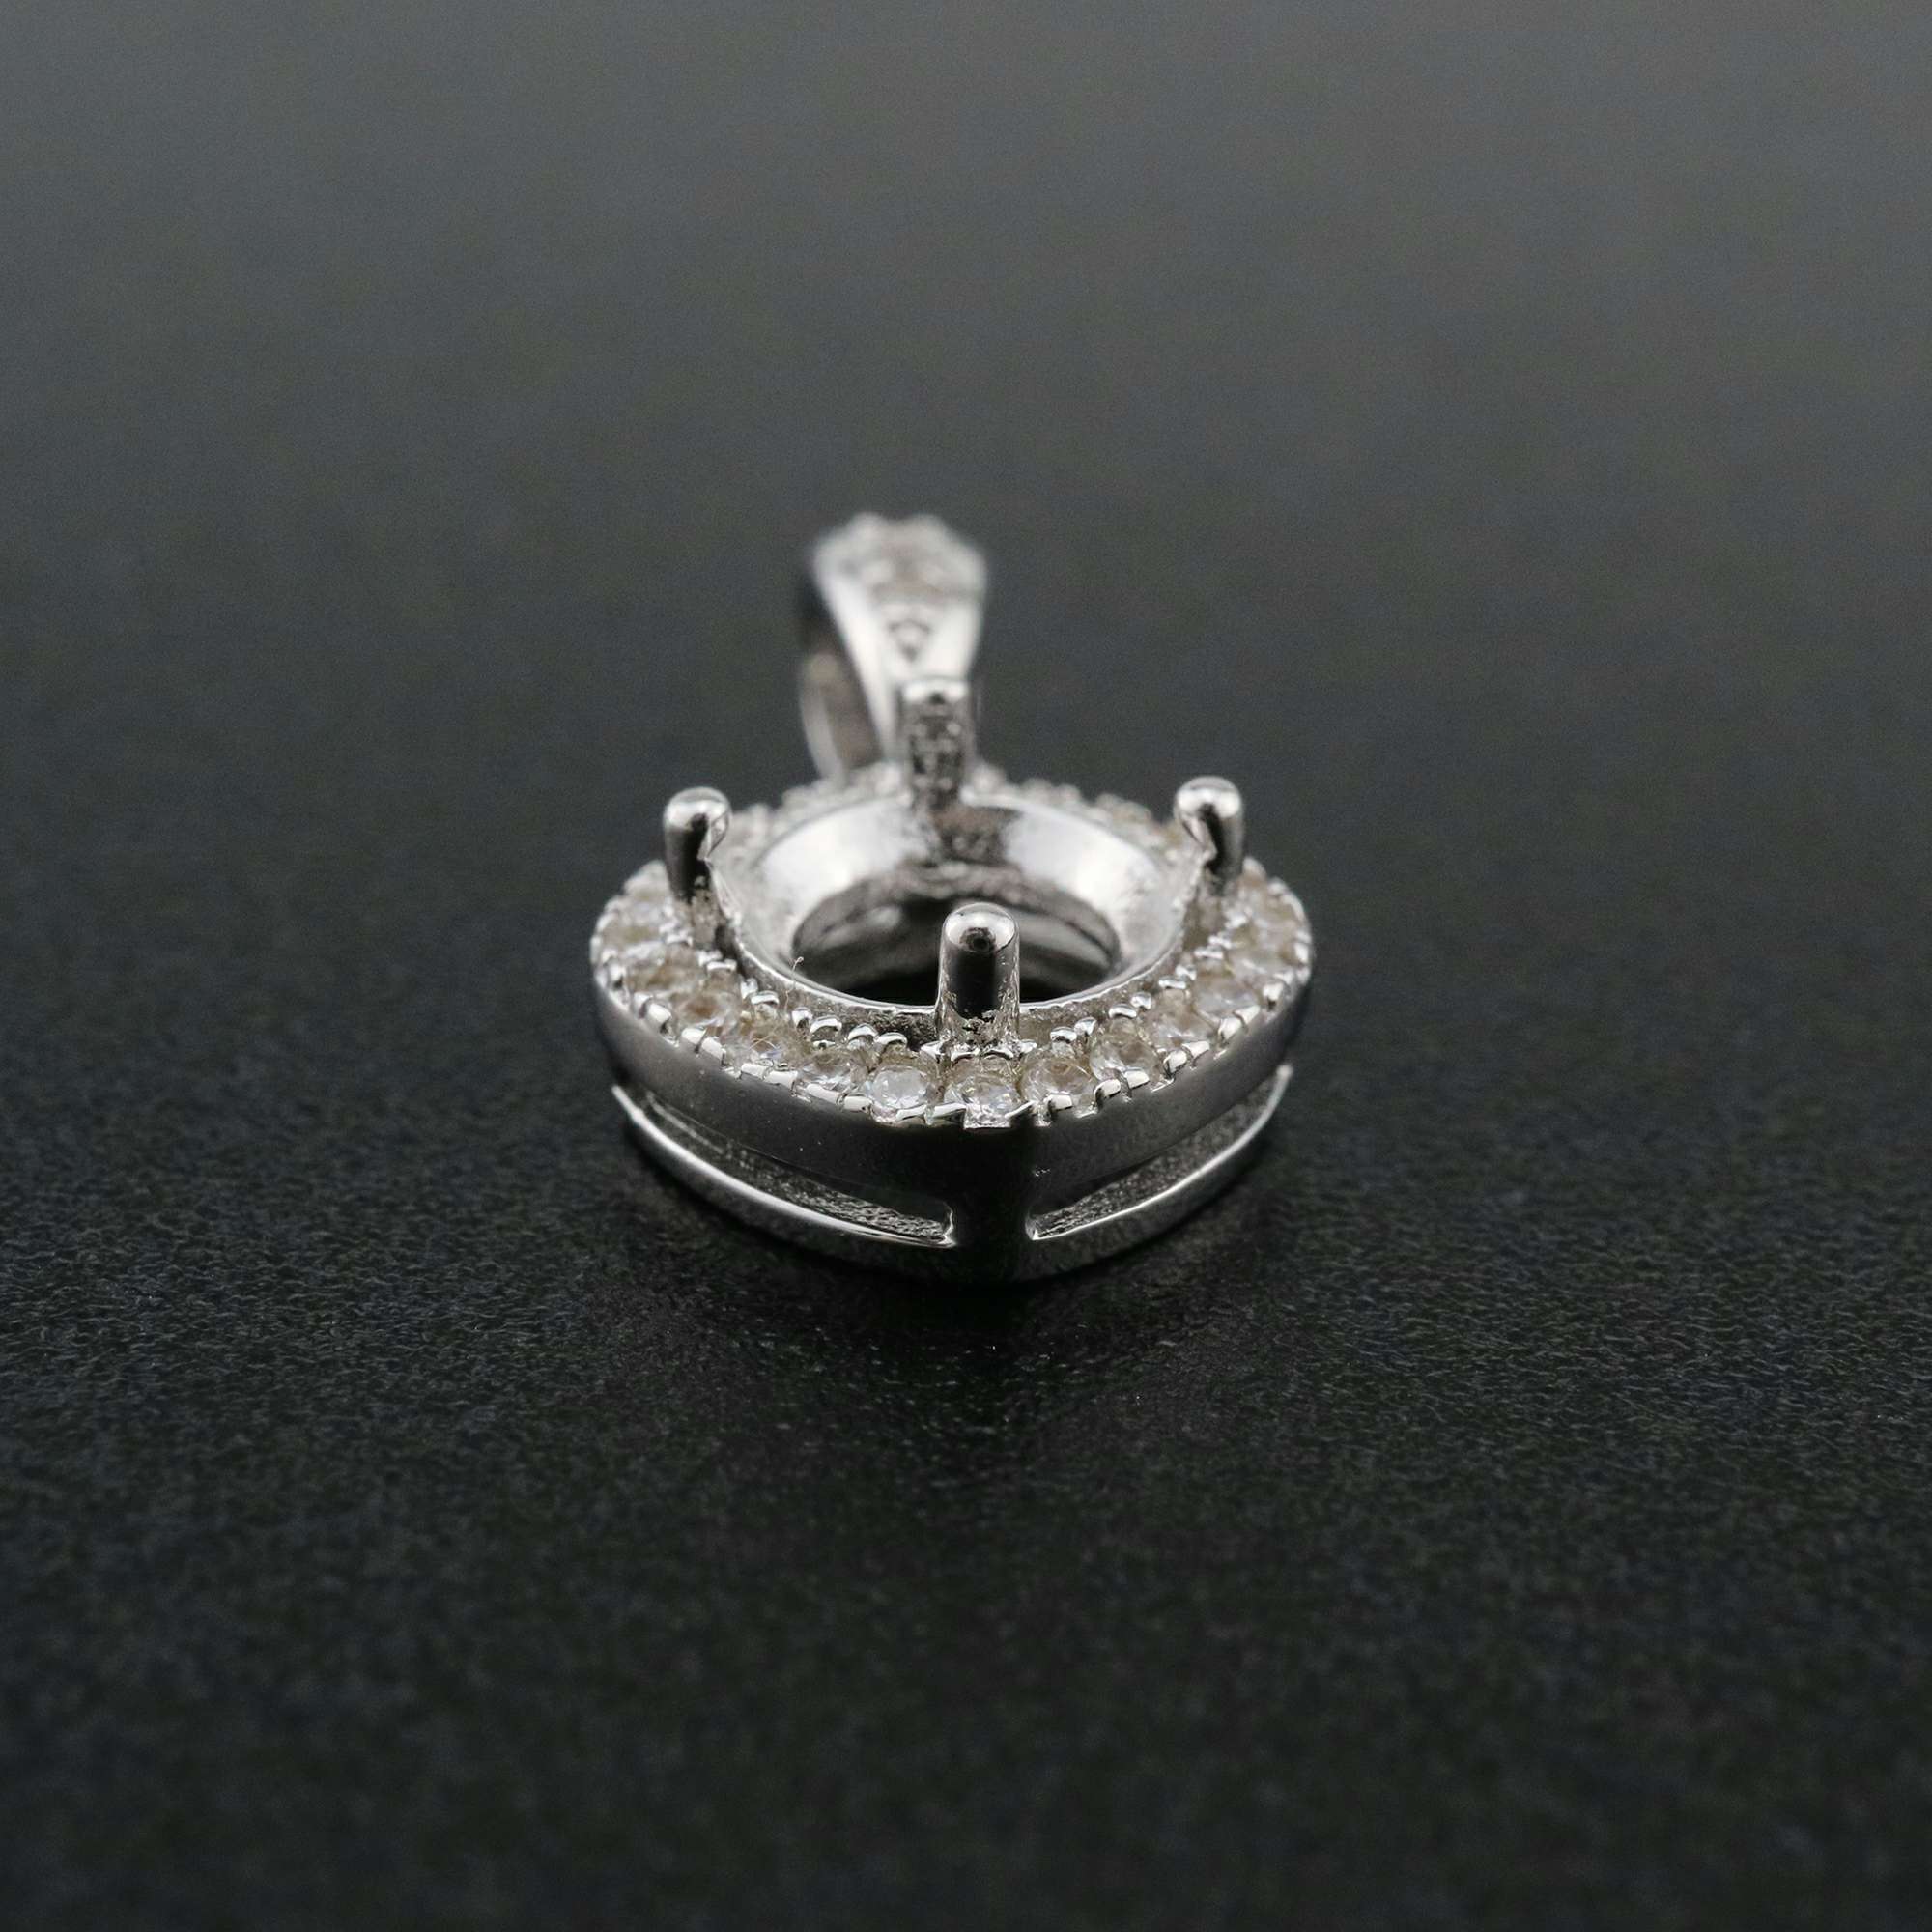 1Pcs 6.5MM Round Prong Pendant Settings Solid 925 Sterling Silver Gesmtone Charm Bezel Tray DIY Supplies 1411253 - Click Image to Close